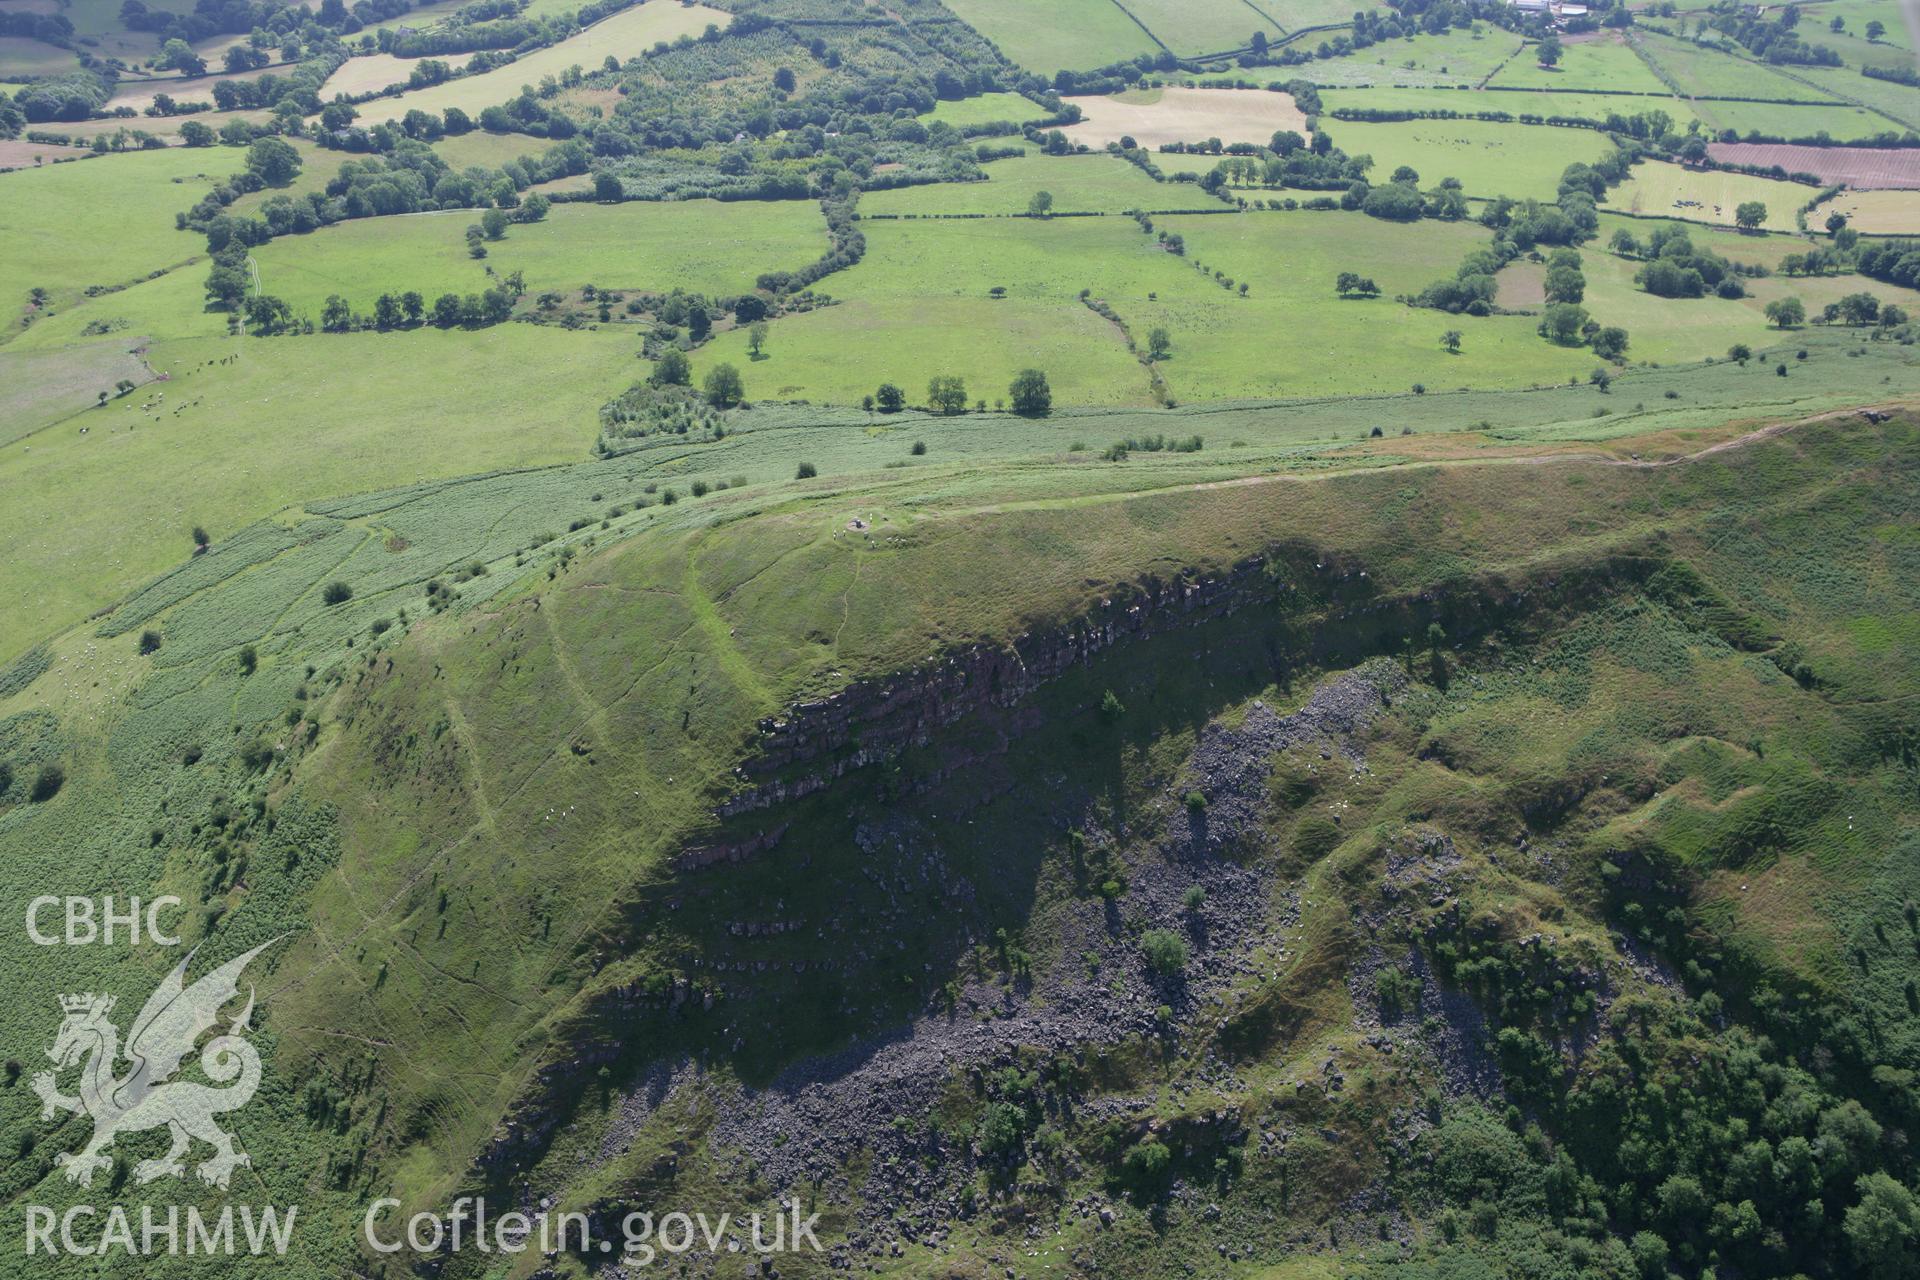 RCAHMW colour oblique photograph of Skirrid Fawr, remains of St Michael's Chapel and Skirrid Fawr Summit Enclosure, from the west. Taken by Toby Driver on 21/07/2008.